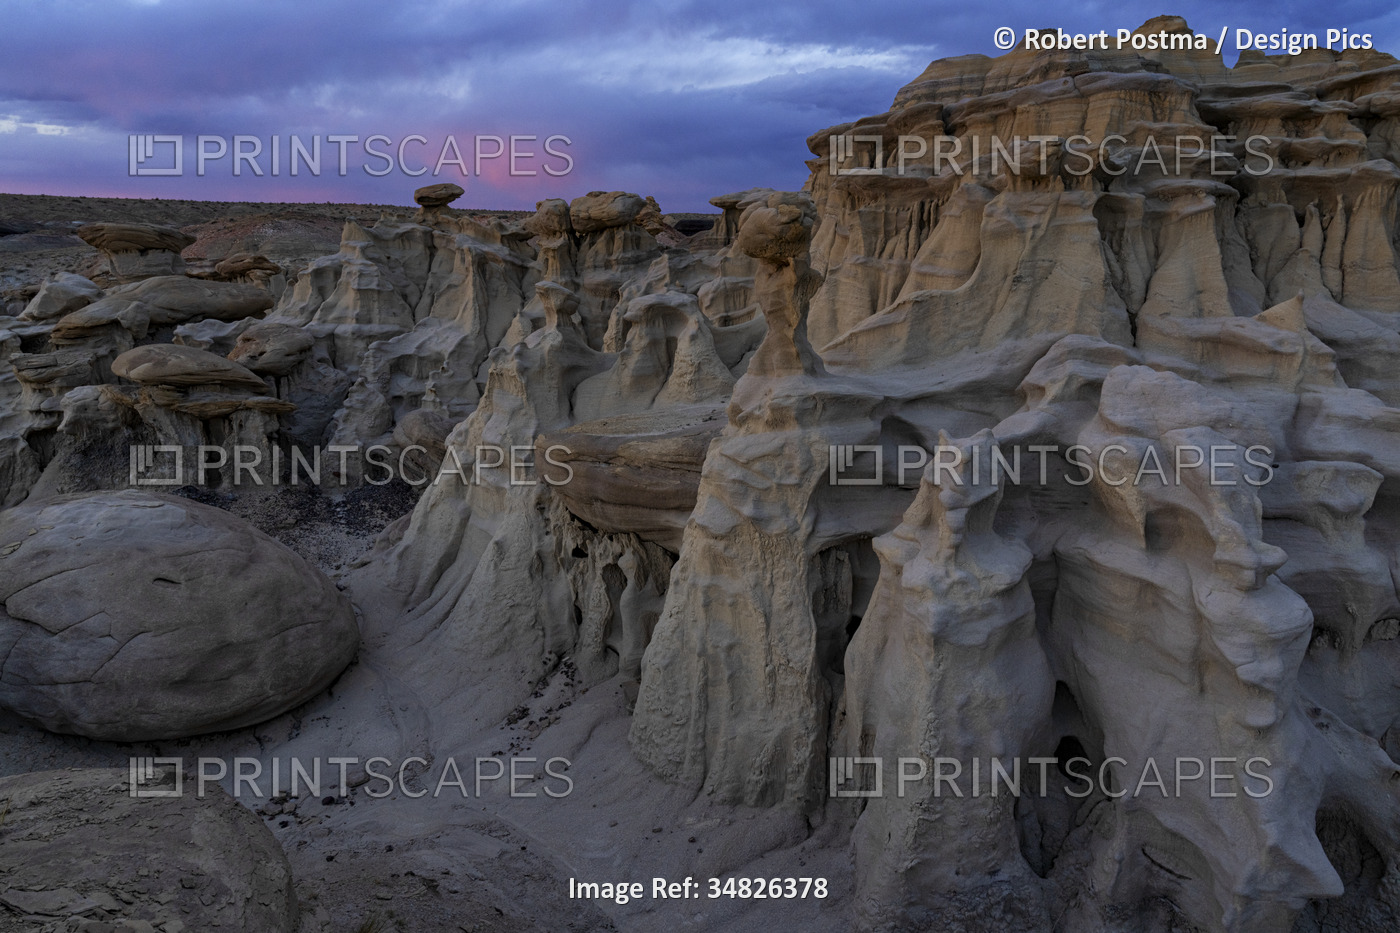 Hoodoos in Valley of Dreams take on fantastical shapes after eons of erosion ...